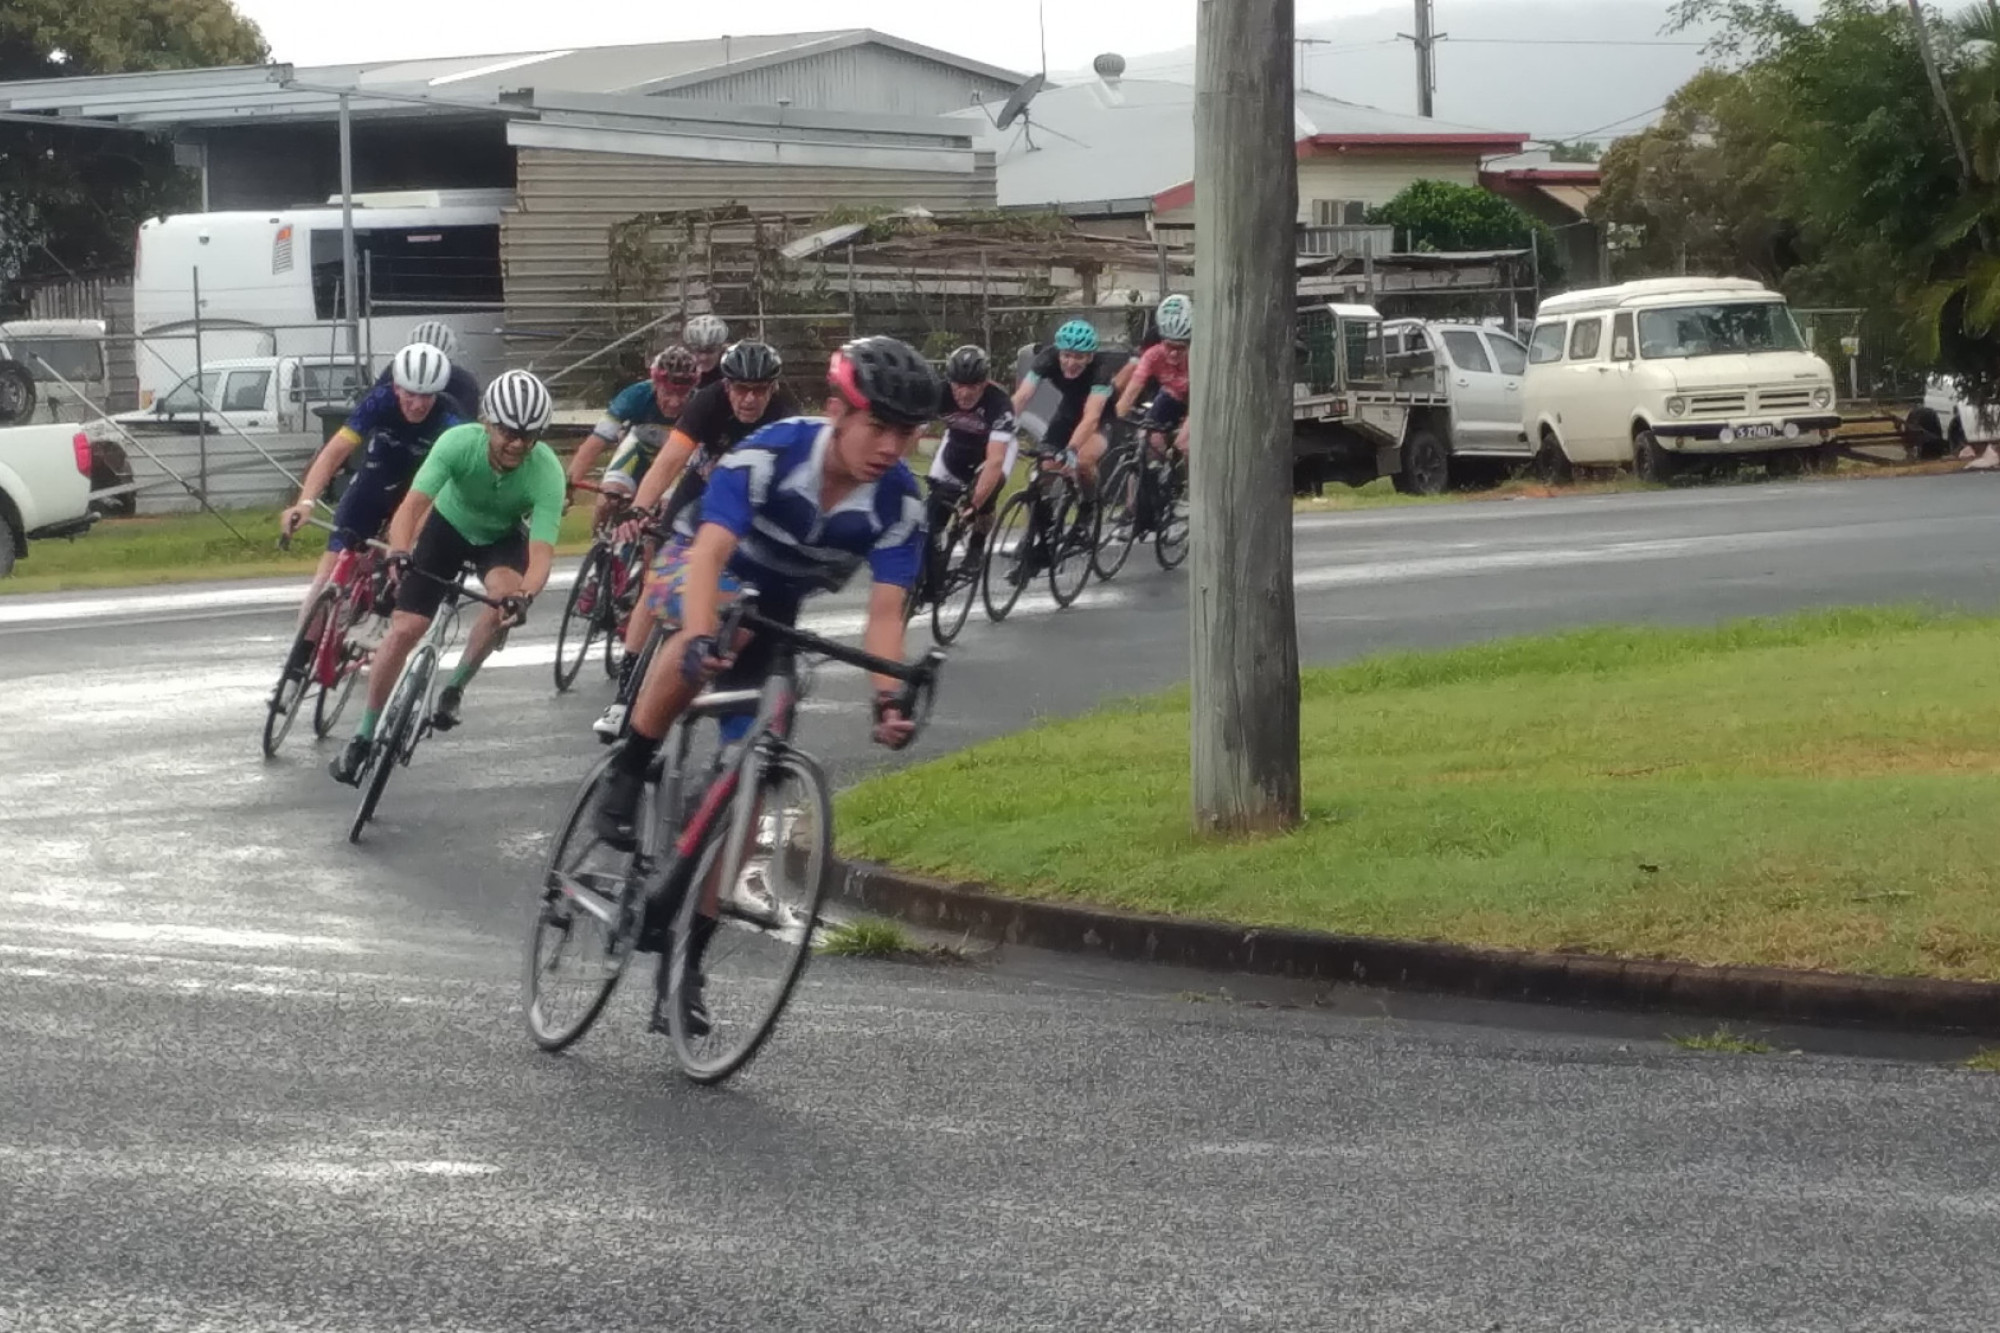 A wet track did not deter the riders - feature photo